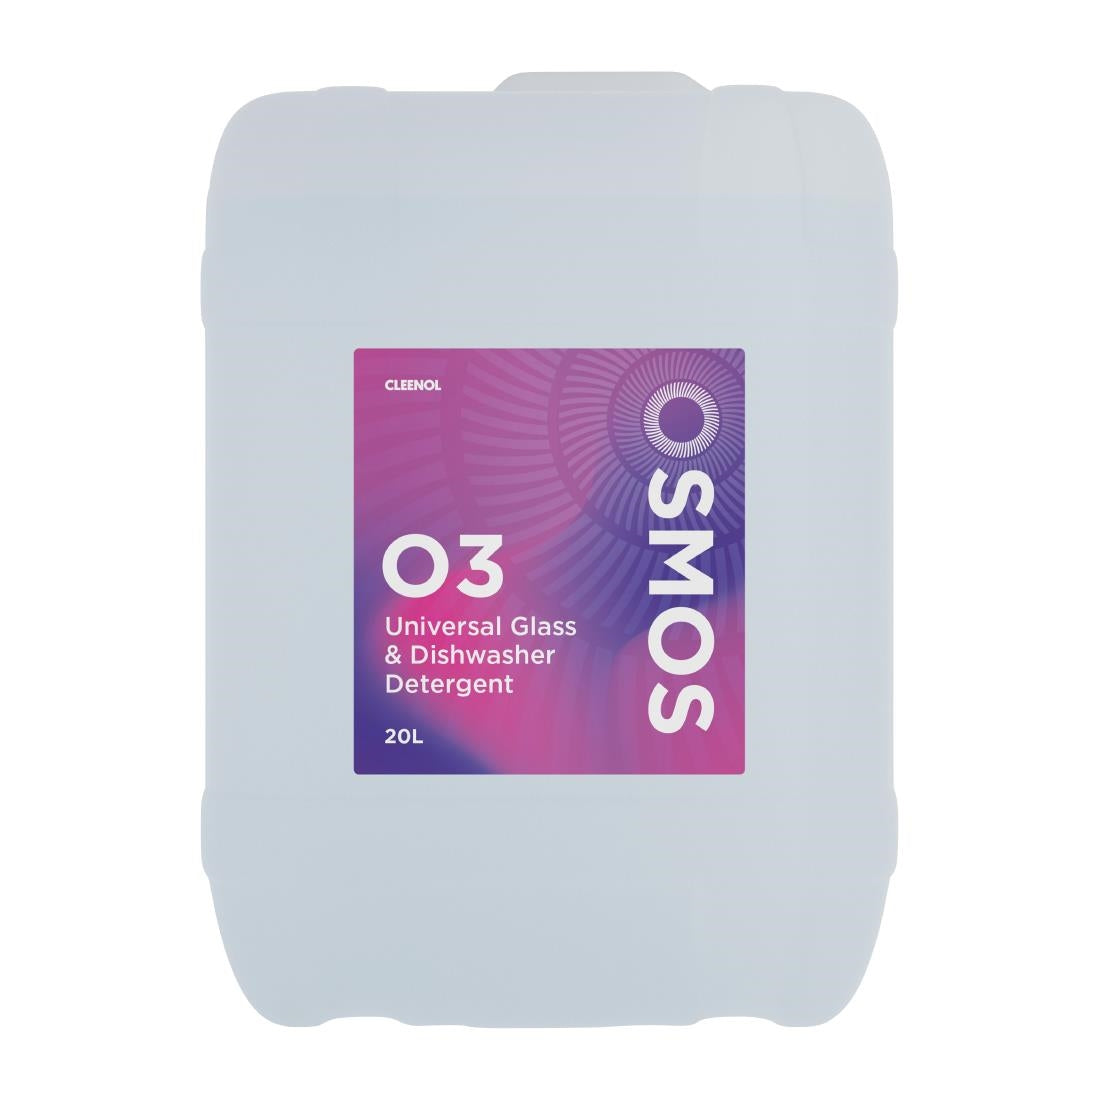 CU595 OSMOS Universal Glass and Dishwasher Detergent (20Ltr) JD Catering Equipment Solutions Ltd